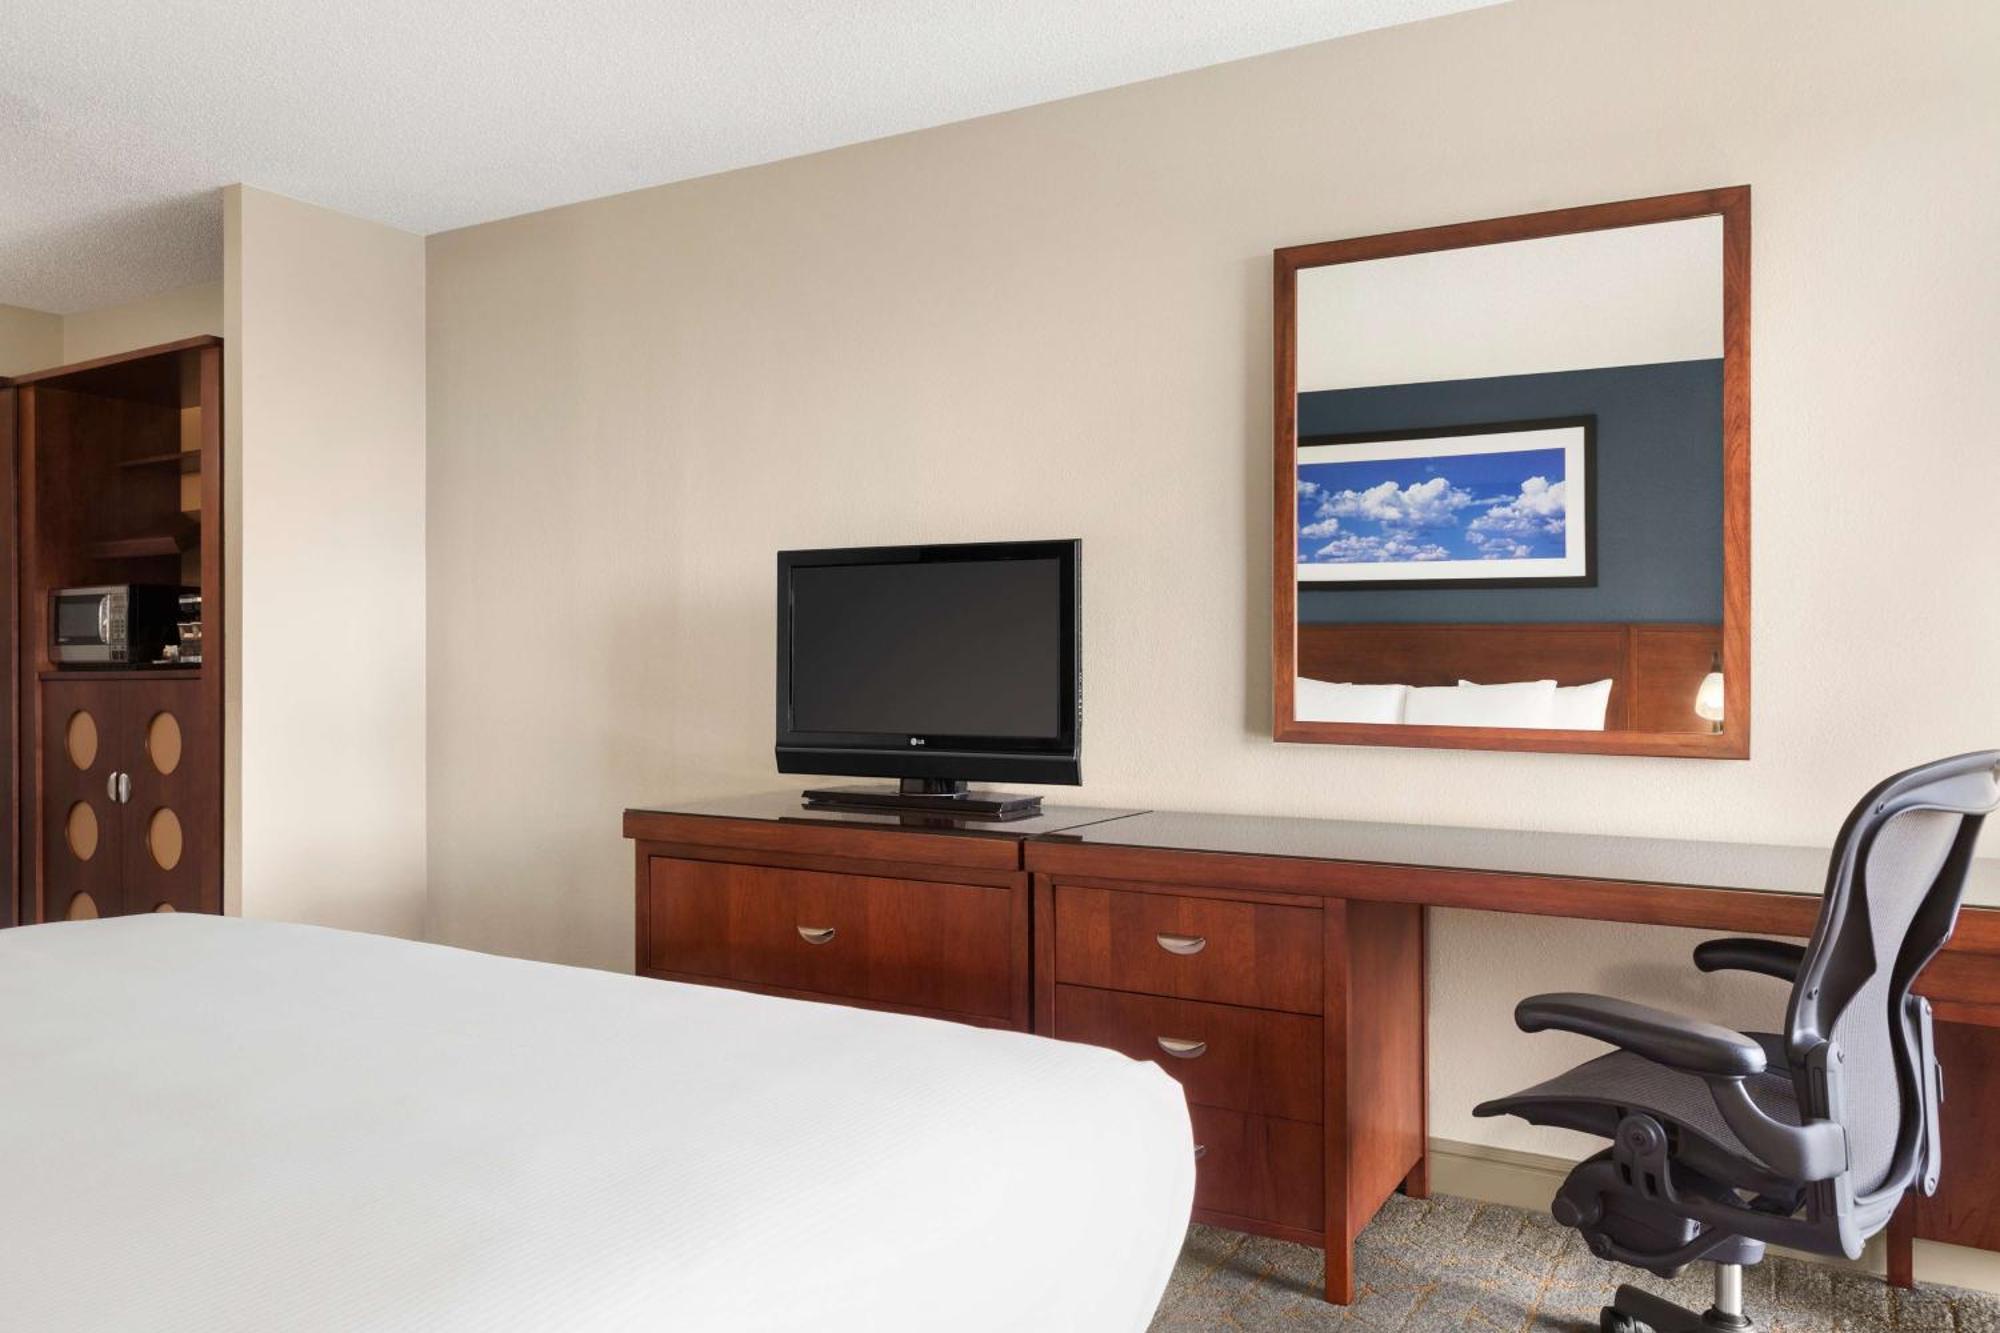 Doubletree By Hilton Dfw Airport North Hotel Irving Luaran gambar